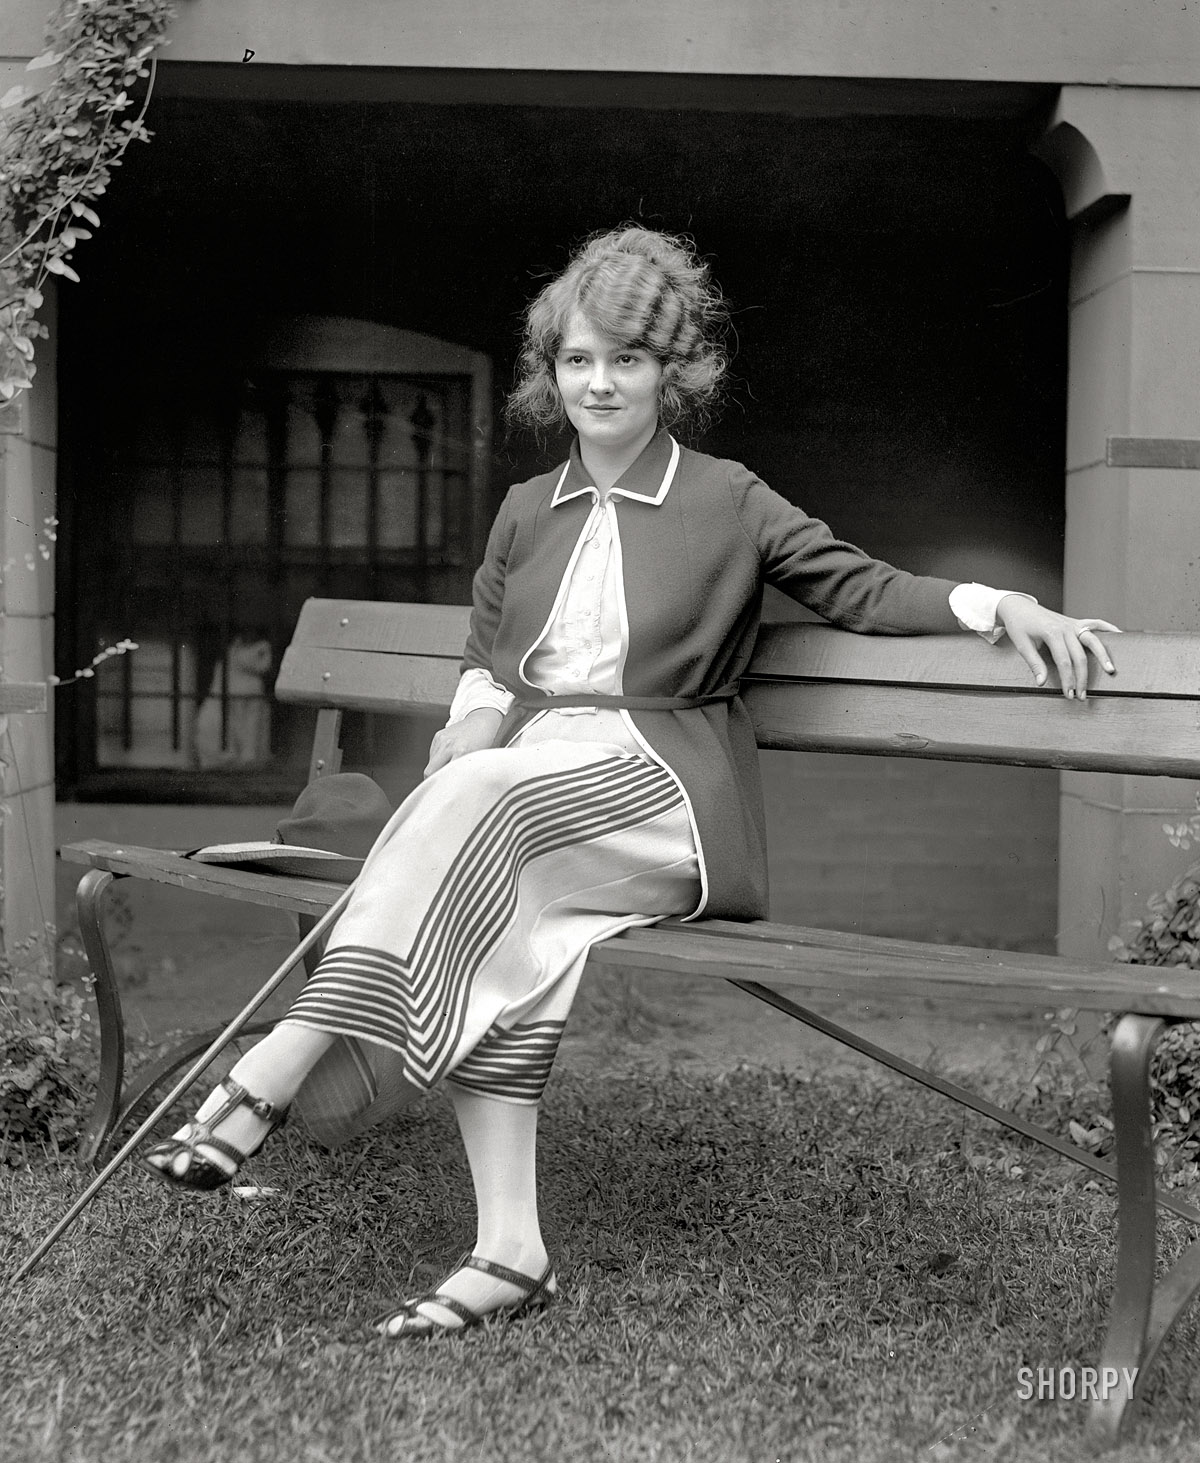 Washington, D.C., circa 1922. "Lulu McGrath." It must have been either luck or amazing foresight that led this girl's parents to name their baby daughter Lulu -- it's hard to imagine her as a Betty or Nancy or anything else. Or it could be that when you're a Lulu, you just grow into the name. In any case, Miss McGrath's brief claim to fame was her appearance in an underwater documentary, "Wonders of the Sea." She was also a runner-up in the first Miss America pageant, in 1921. National Photo Company Collection glass negative. View full size.